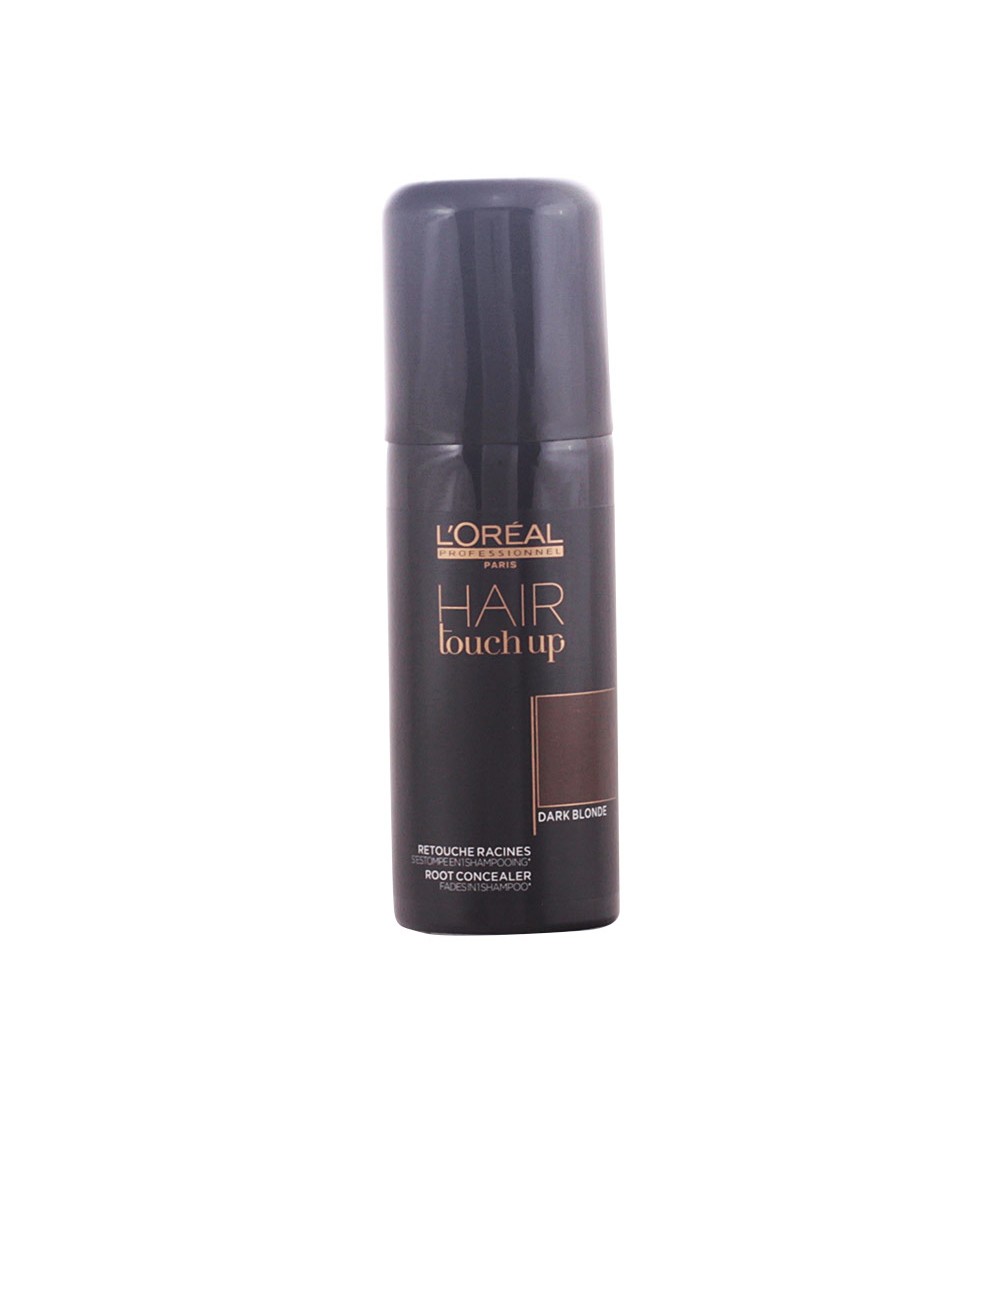 HAIR TOUCH UP root concealer 75ml